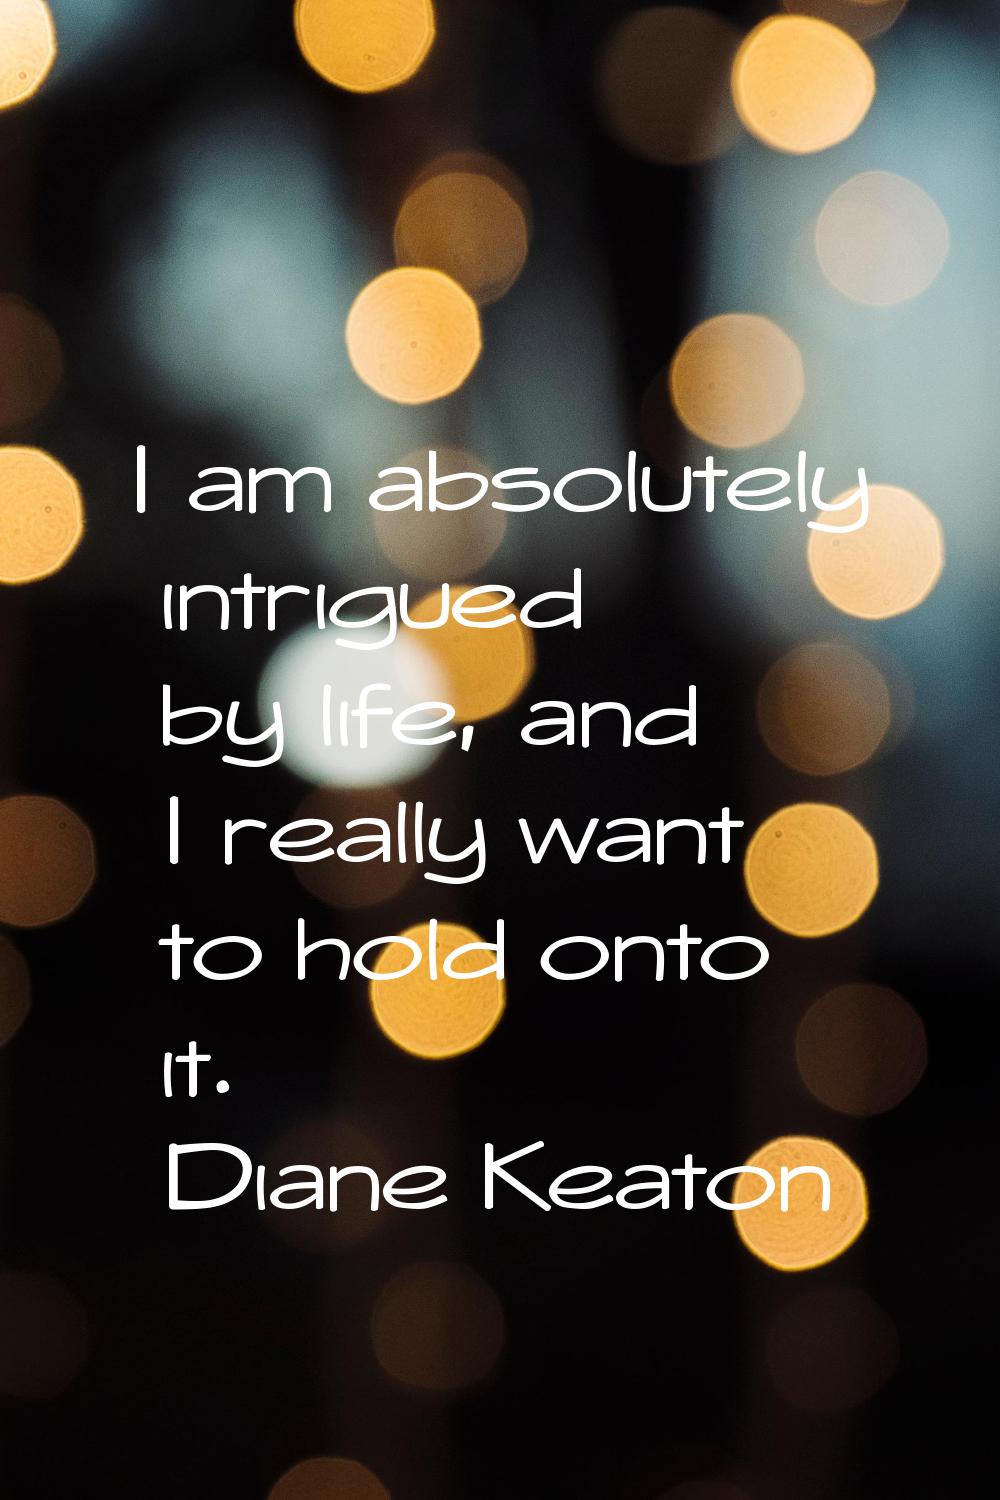 I am absolutely intrigued by life, and I really want to hold onto it.